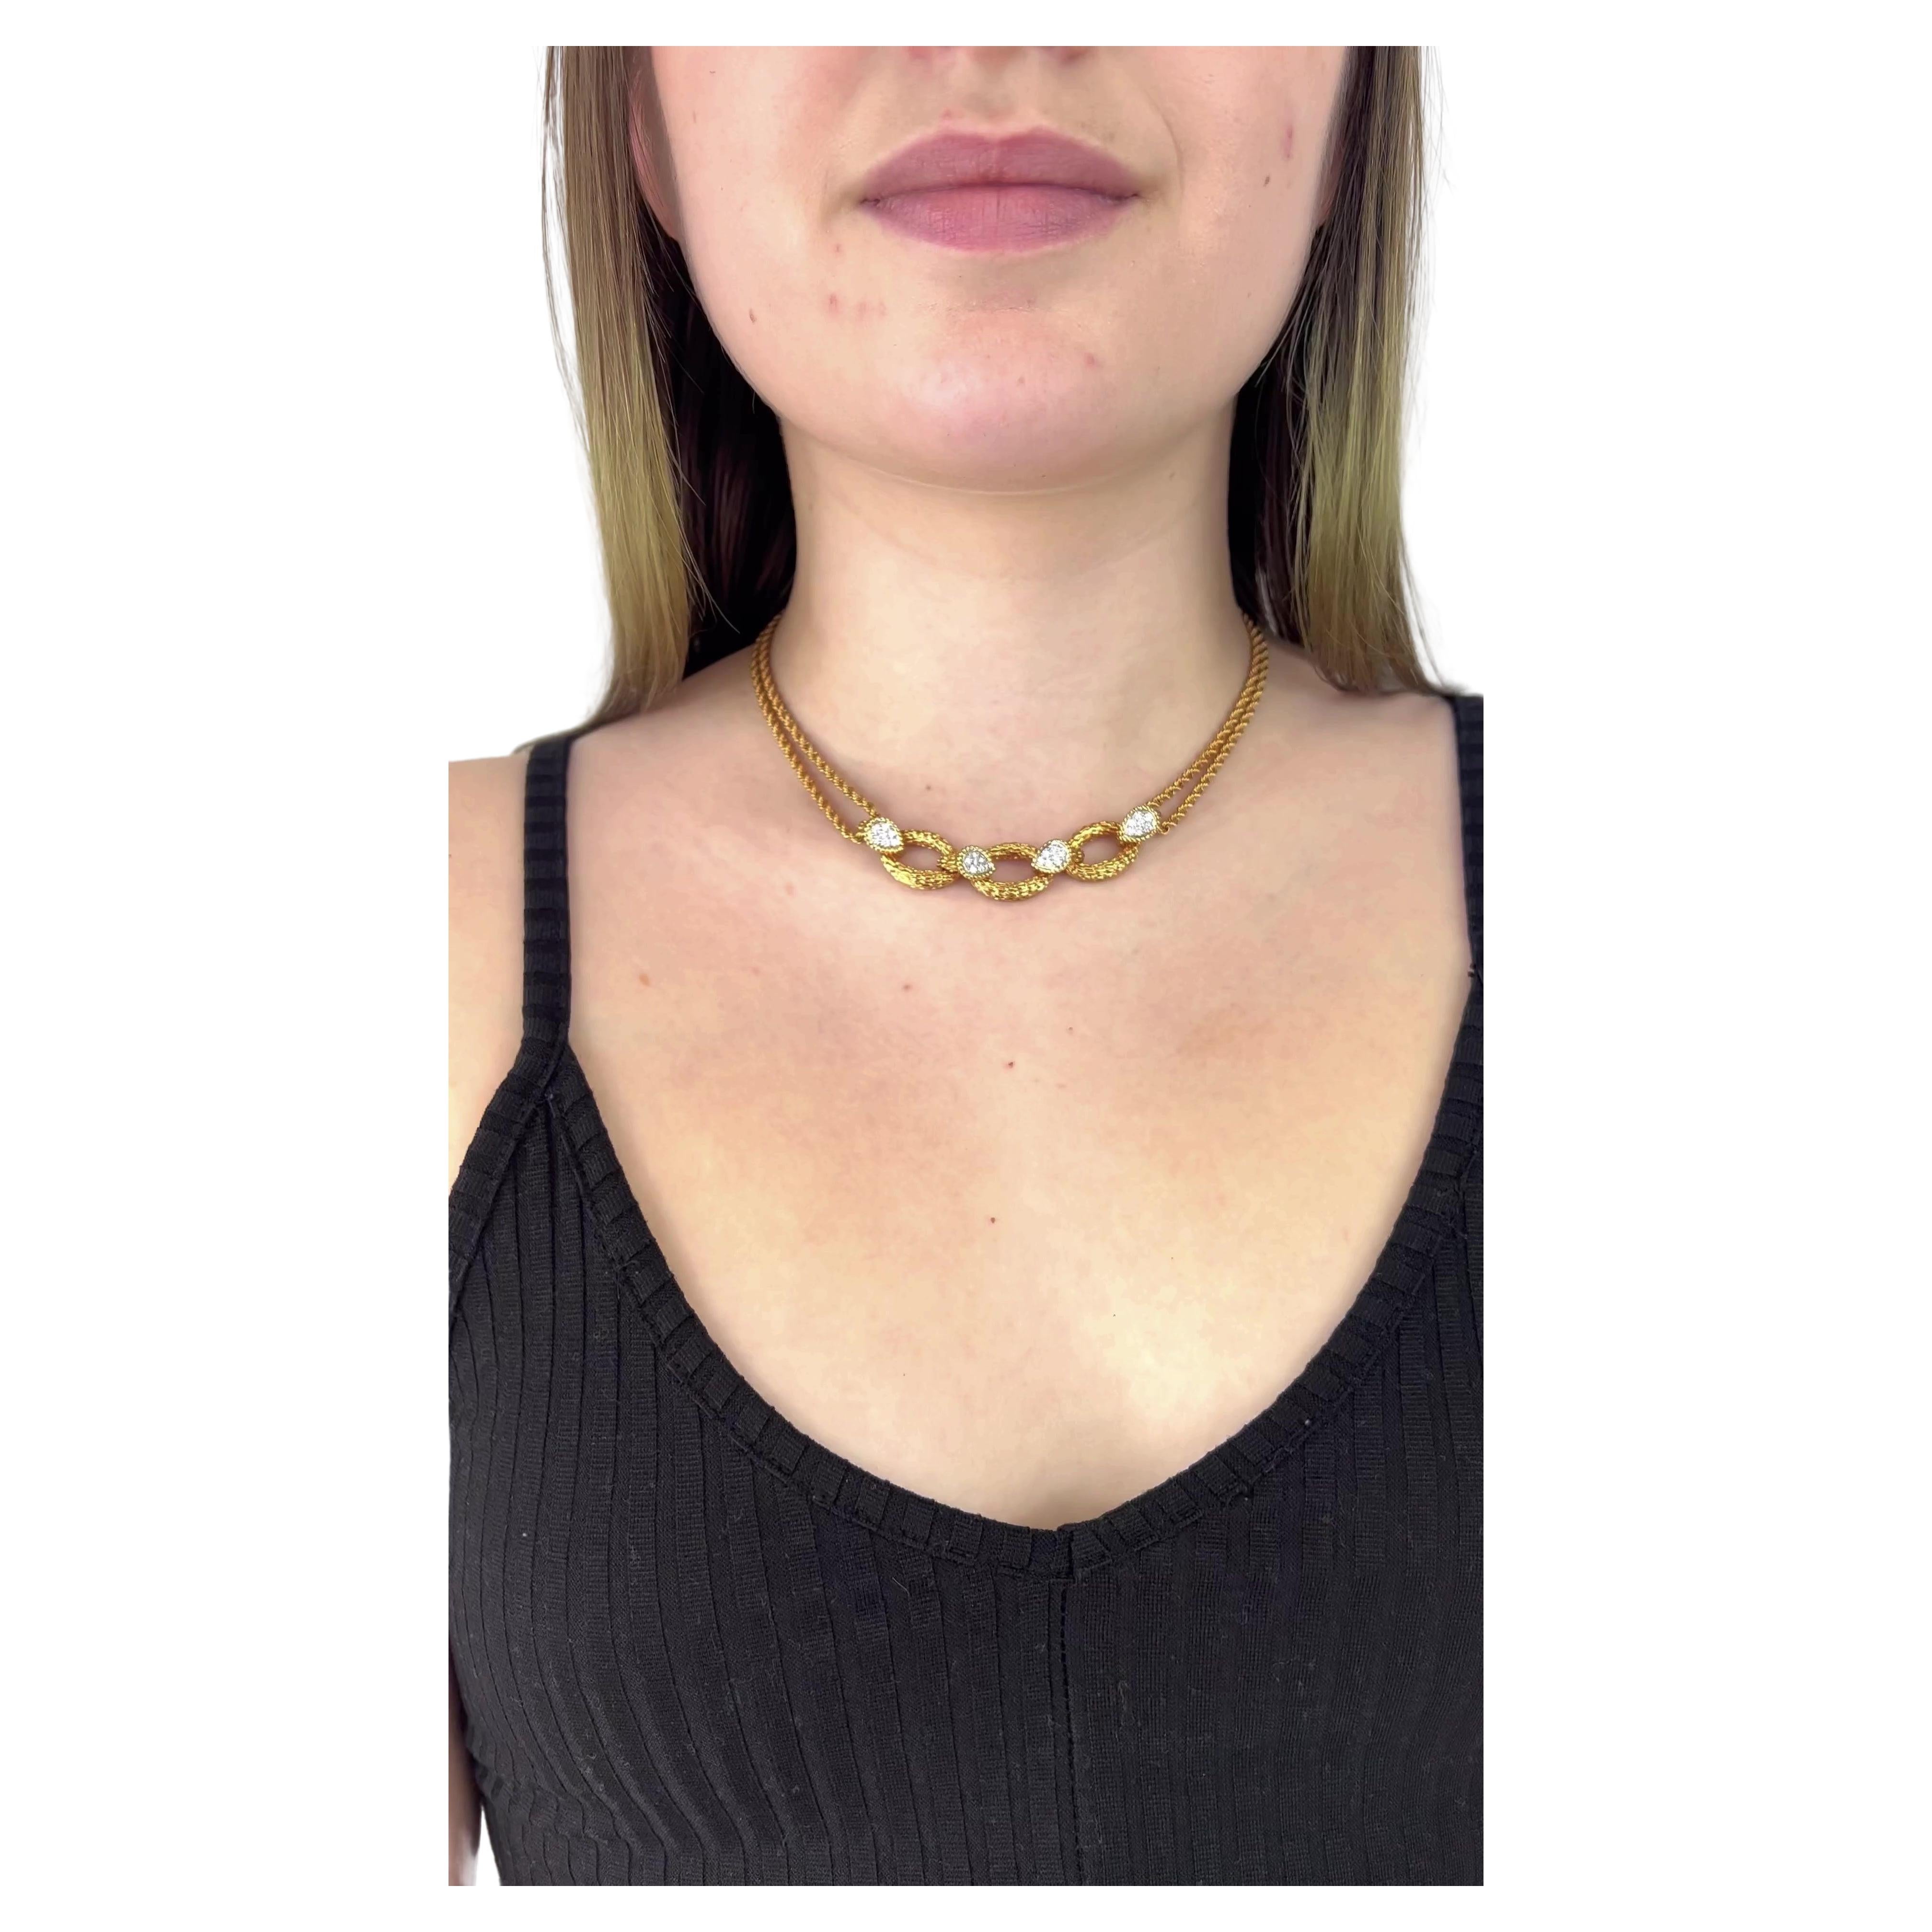 One Vintage Boucheron Serpent Bohème Diamond 18 Karat Gold Necklace. Featuring 28 round brilliant cut diamonds with a total weight of approximately 0.80 carats, graded D-E color, VVS clarity. Crafted in 18 karat yellow gold, signed Boucheron with